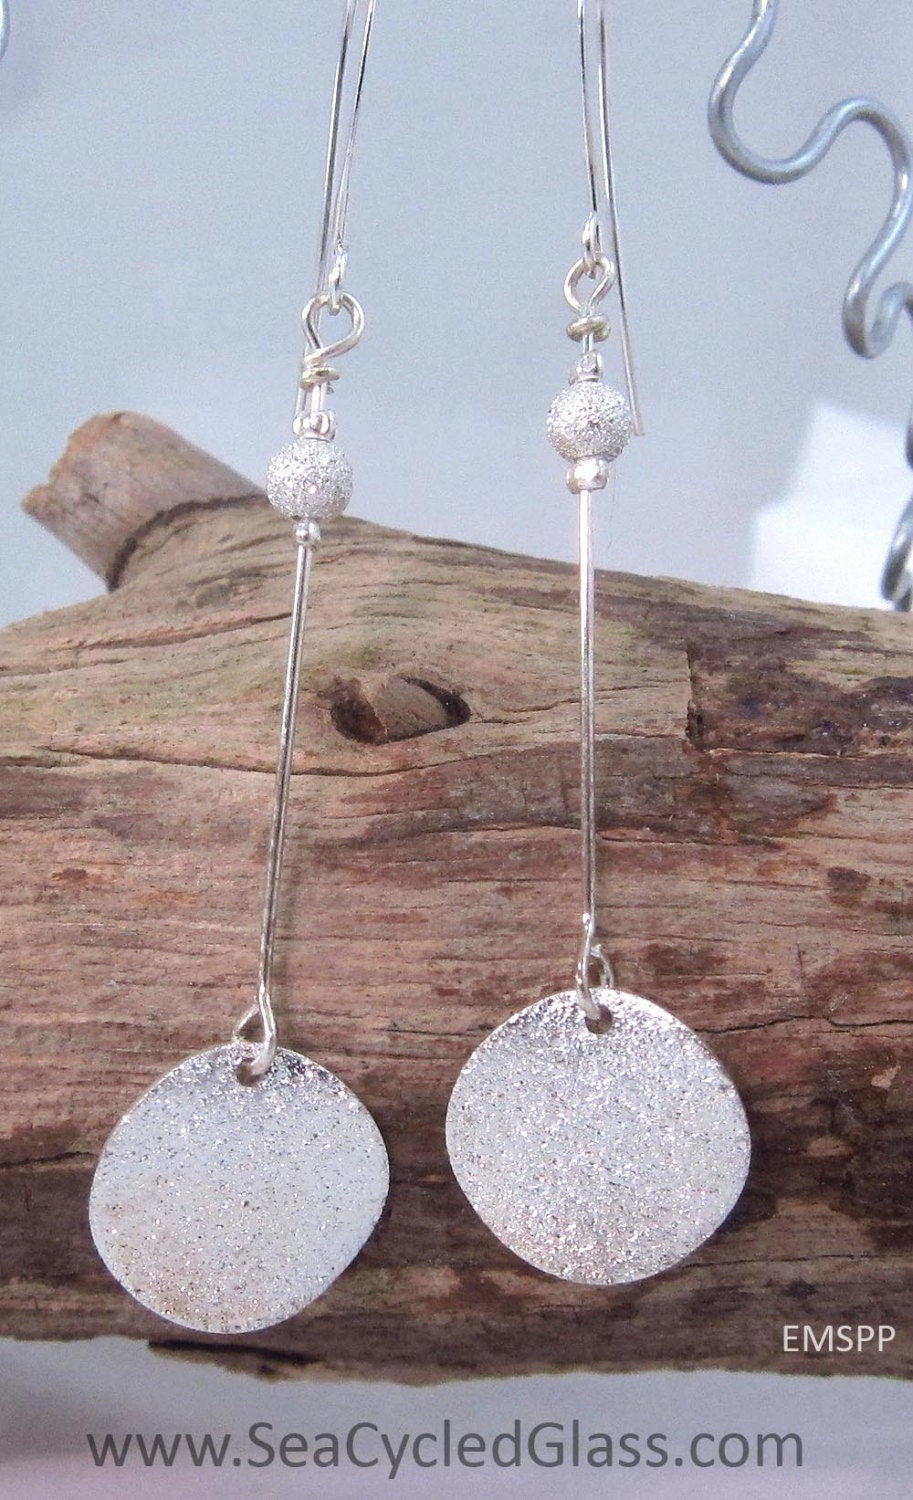 Moonshine Earrings - Silverplate stardust disk and bead on headpin with hypoallergenic silverplate earring hooks